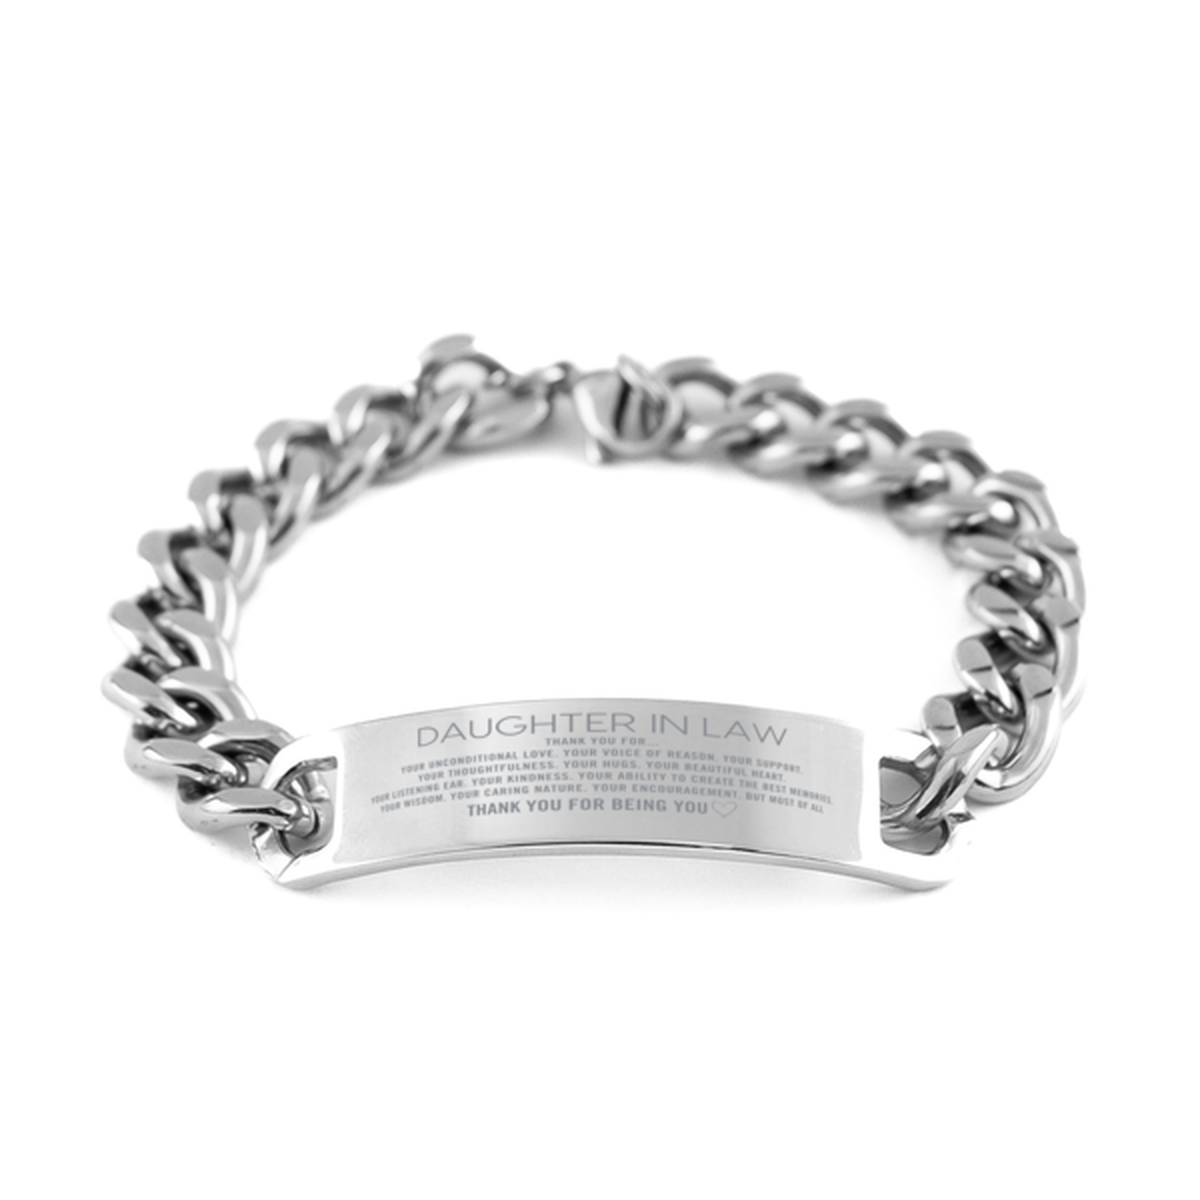 Daughter In Law Cuban Chain Stainless Steel Bracelet Custom, Engraved Gifts For Daughter In Law Christmas Graduation Birthday Gifts for Men Women Daughter In Law Thank you for Your unconditional love